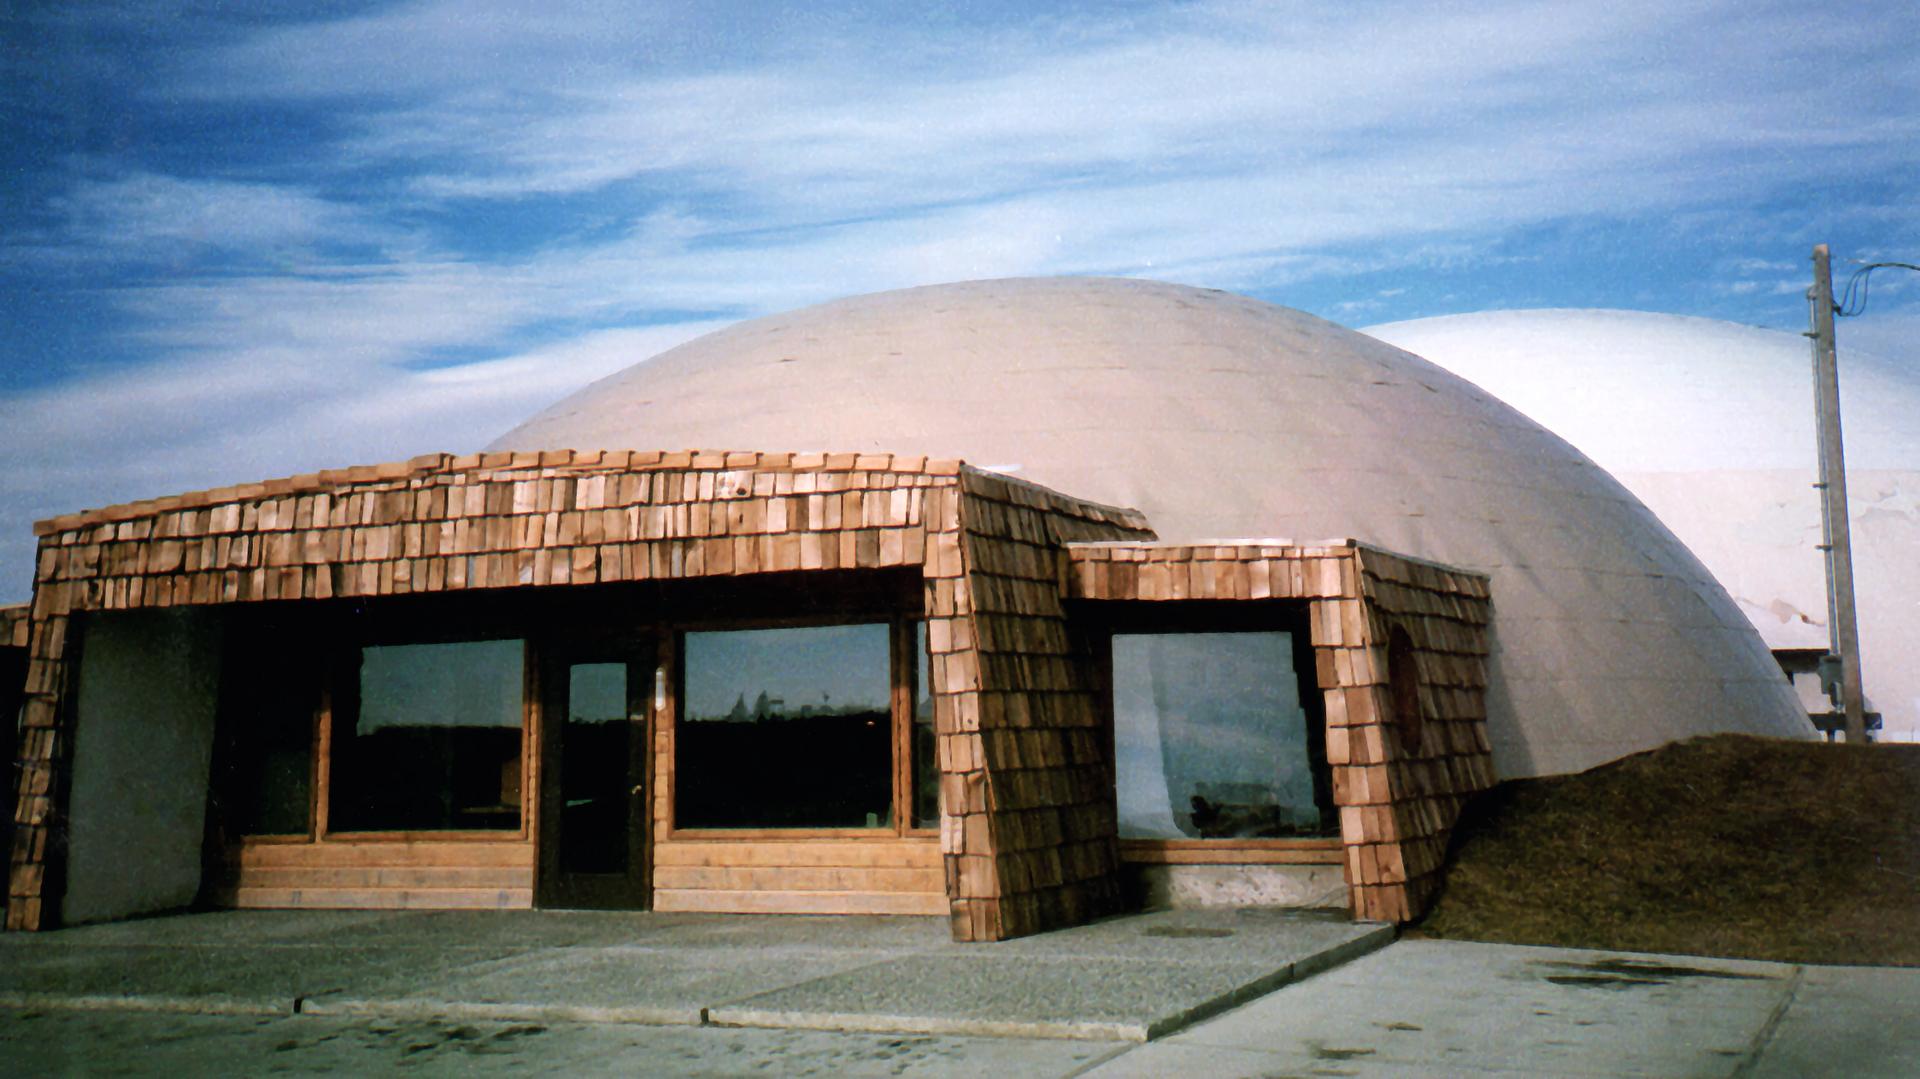 The metal clad Monolithic Dome office in Idaho Falls, Idaho.